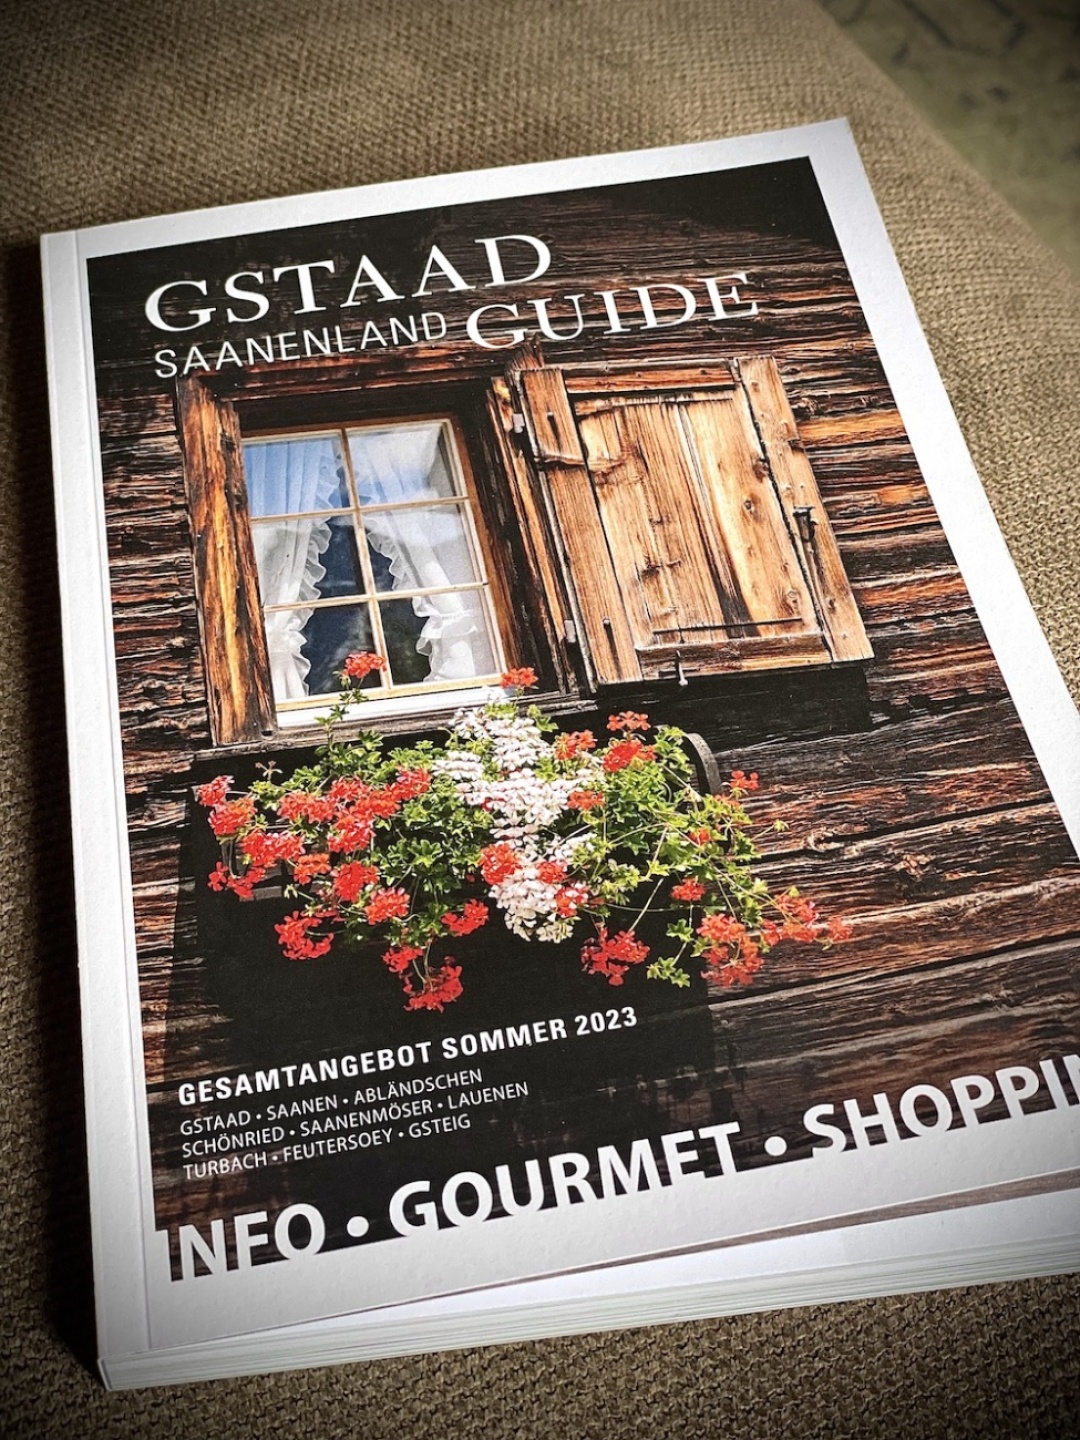 Check the local Gstaad -  Saanenland guide for further dates and opening hours and inspirations